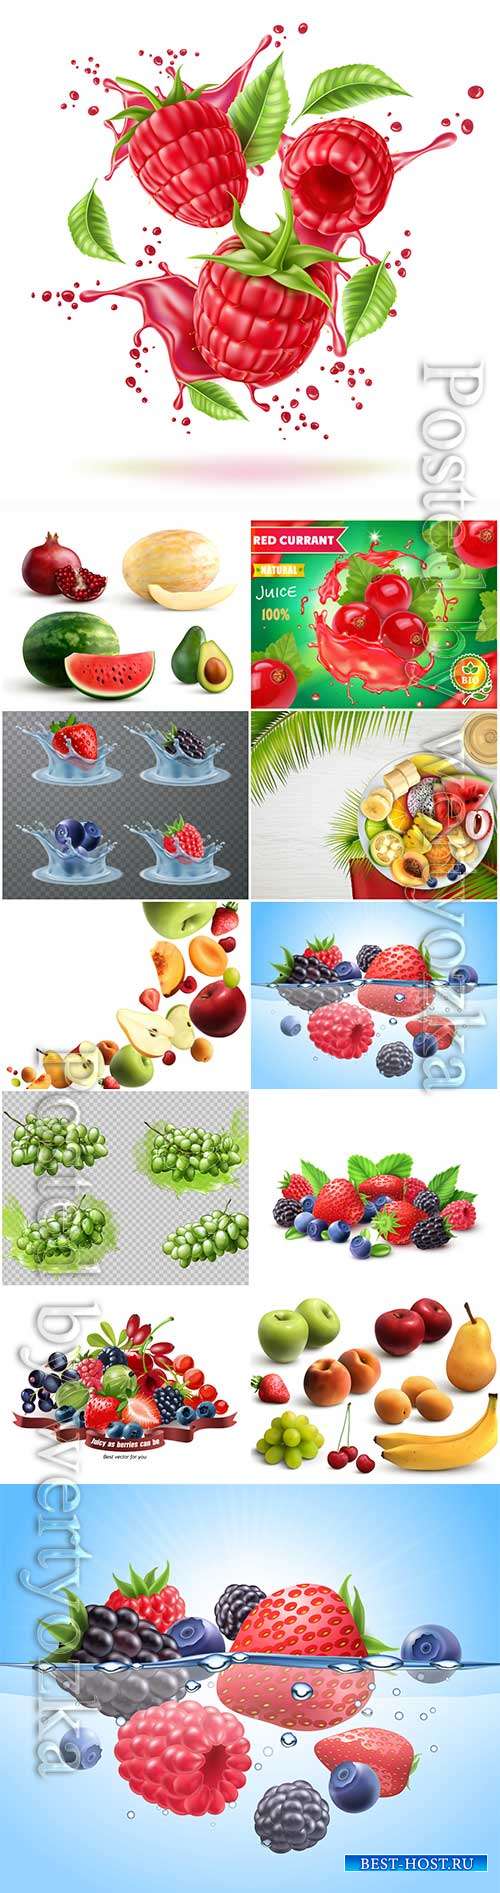 Mix of fresh berries and fruits isolated on white background